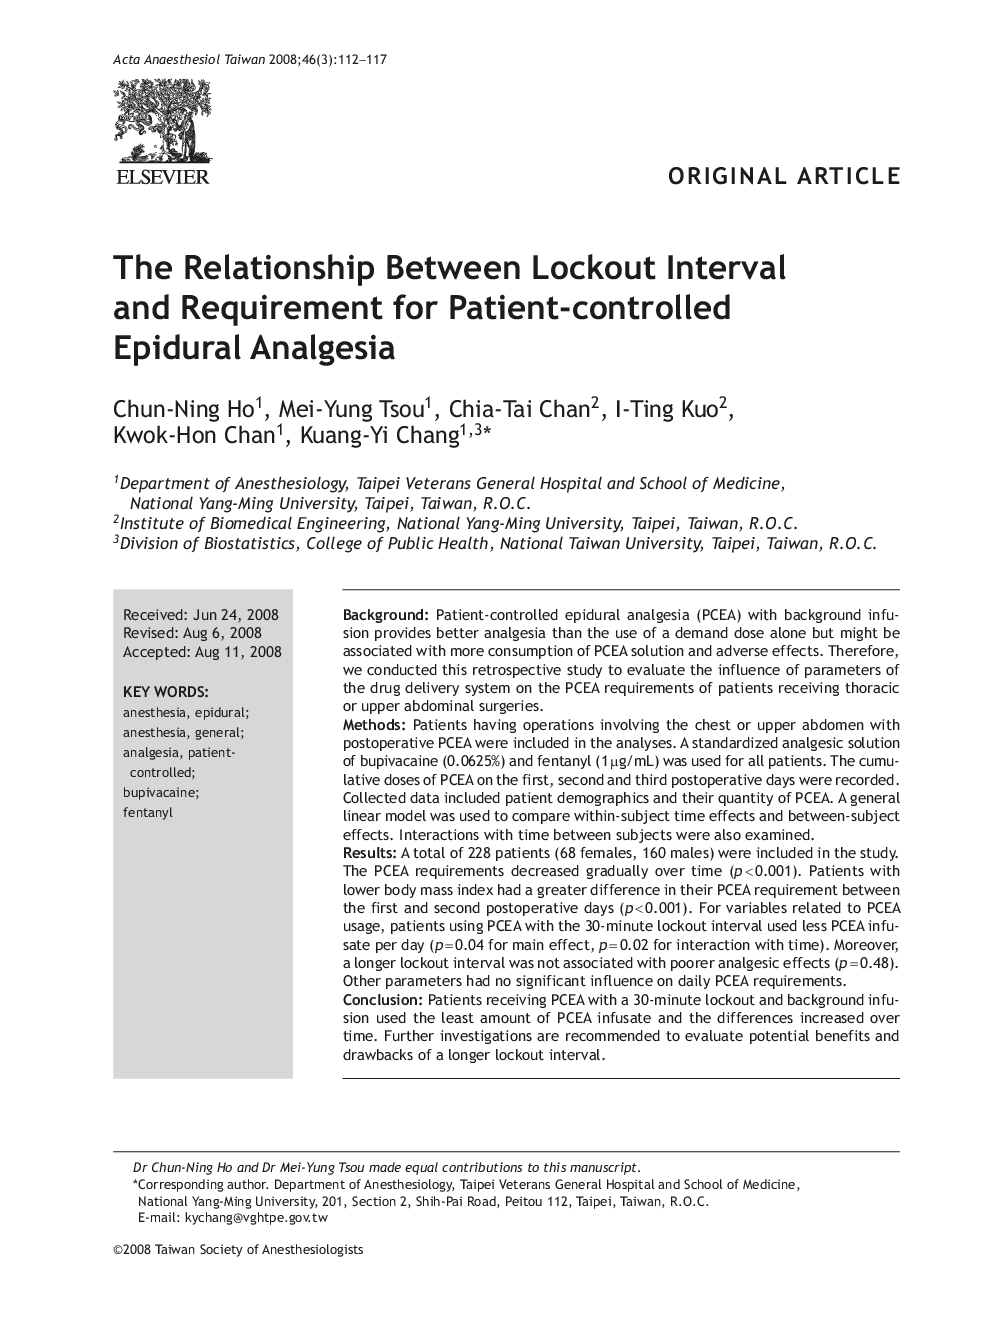 The Relationship Between Lockout Interval and Requirement for Patient-controlled Epidural Analgesia